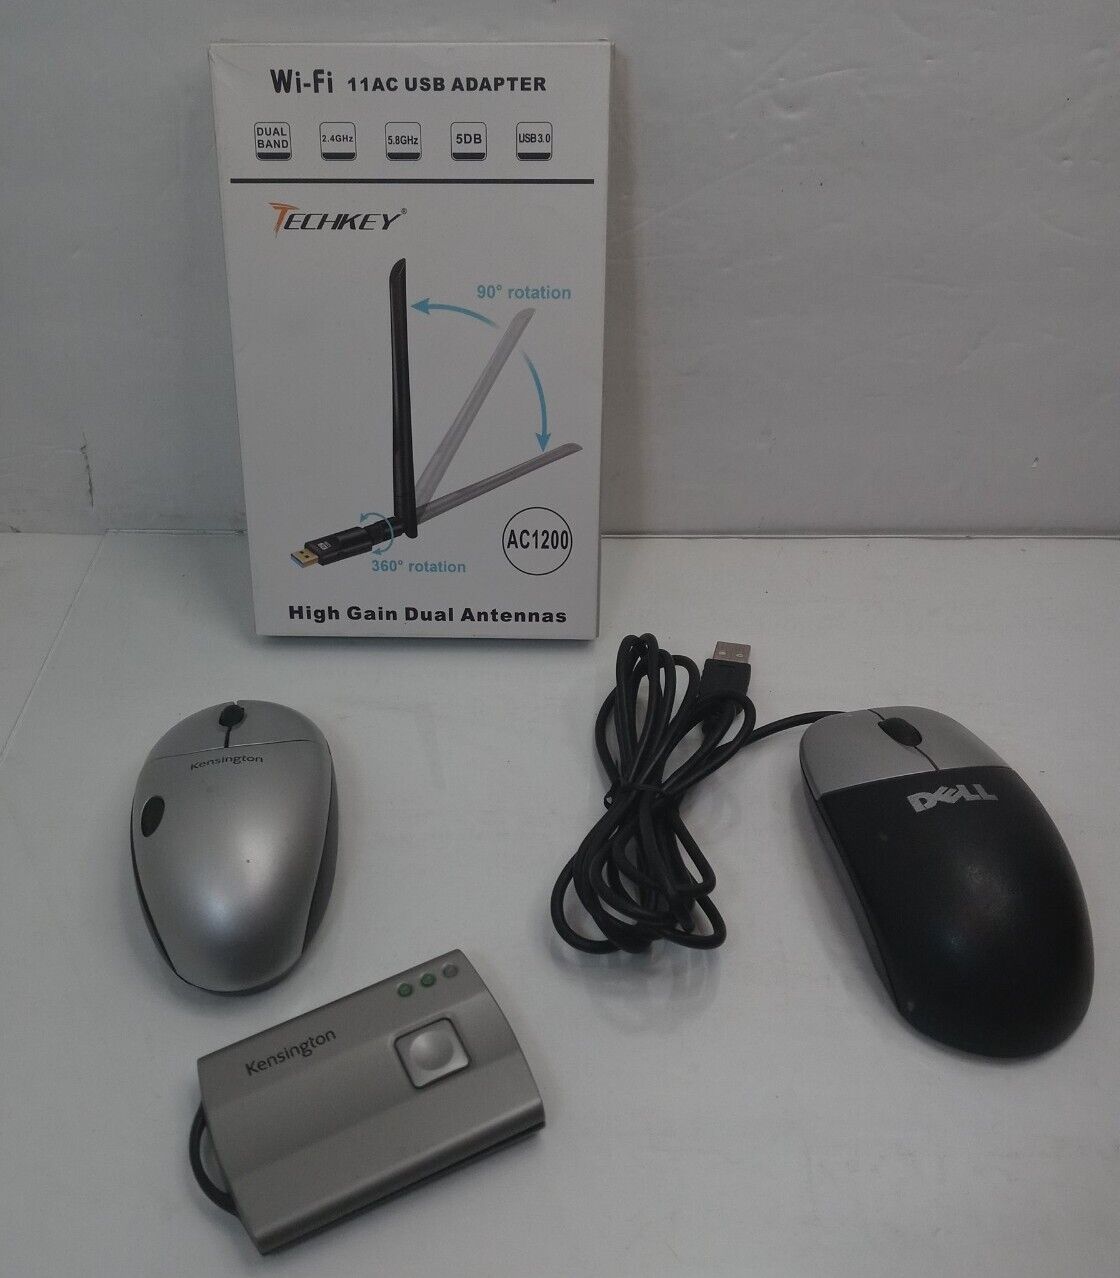 PC/Computer Accessories bundle (New And Used) - Dell - Kensington - Techkey